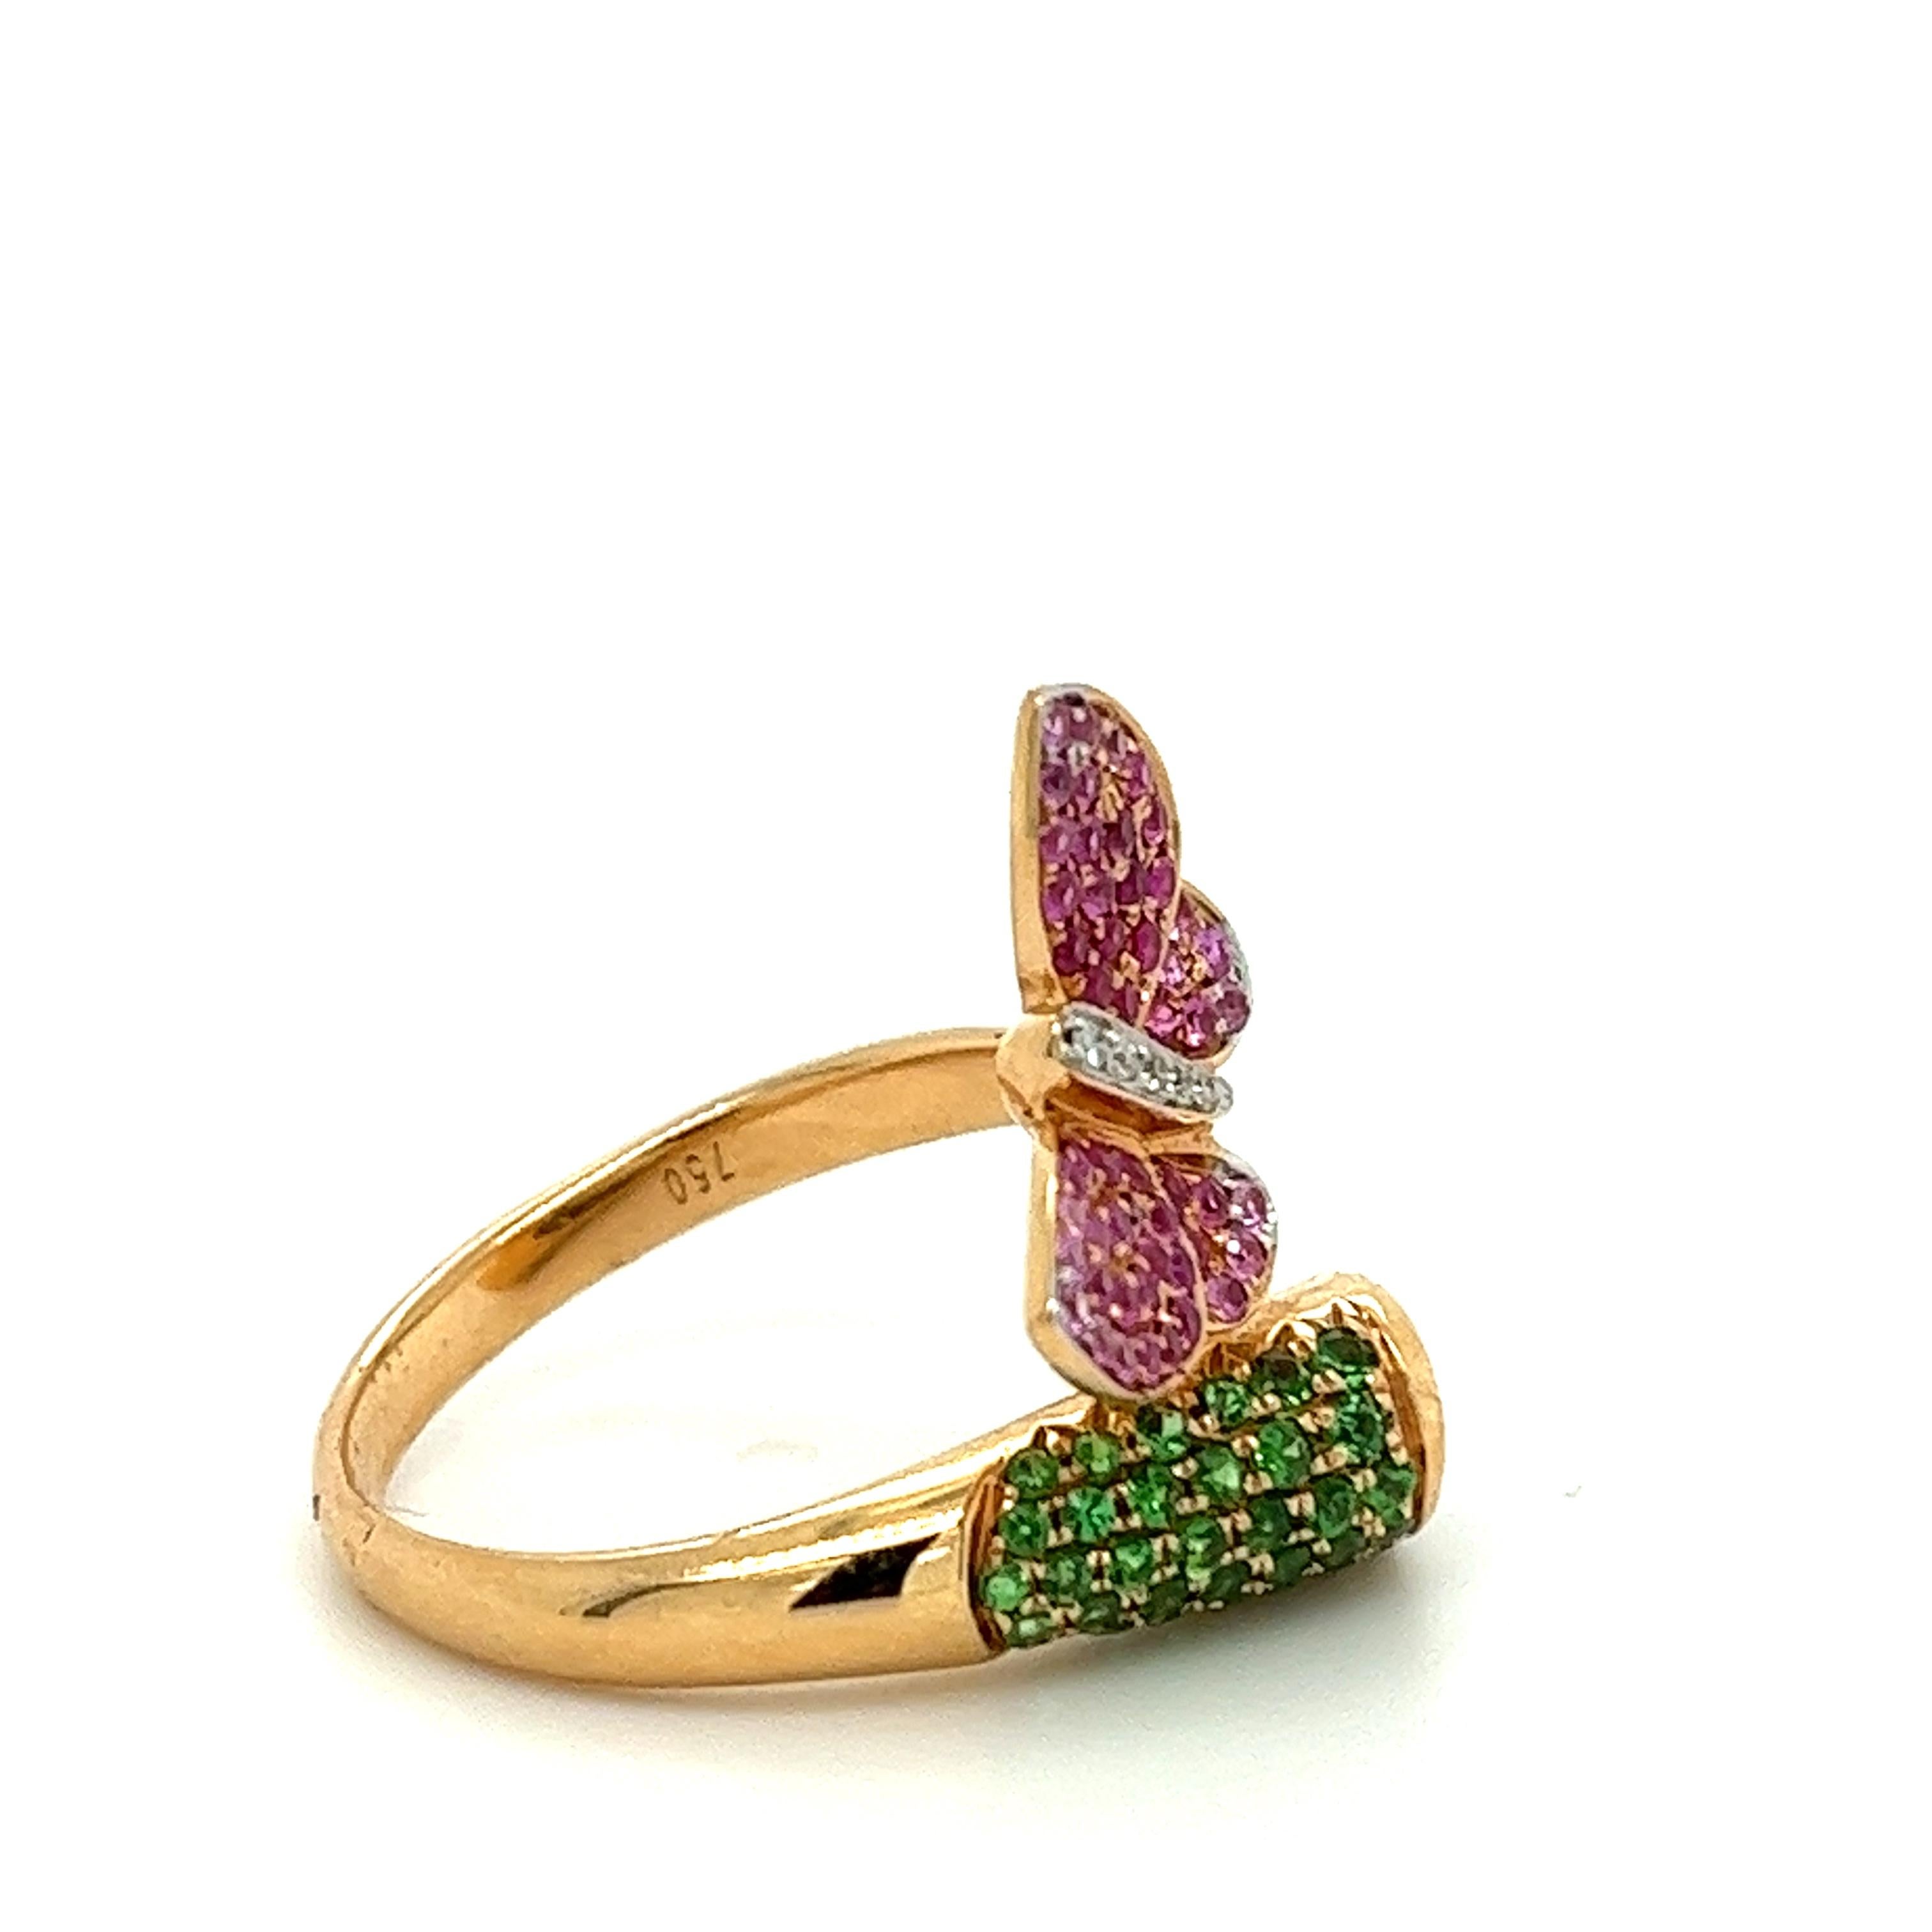 18K Gold Nature Collection Diamond Ring with Pink Sapphires and Tourmaline

5 Diamonds - 0.02 CT
39 Green Garnets - 0.48 CT
52 Pink Sapphires - 0.45 CT
1 Tourmaline - 0.76 CT
18K Rose Gold - 5.59 GM

Behold the exquisite allure of our 18K rose gold